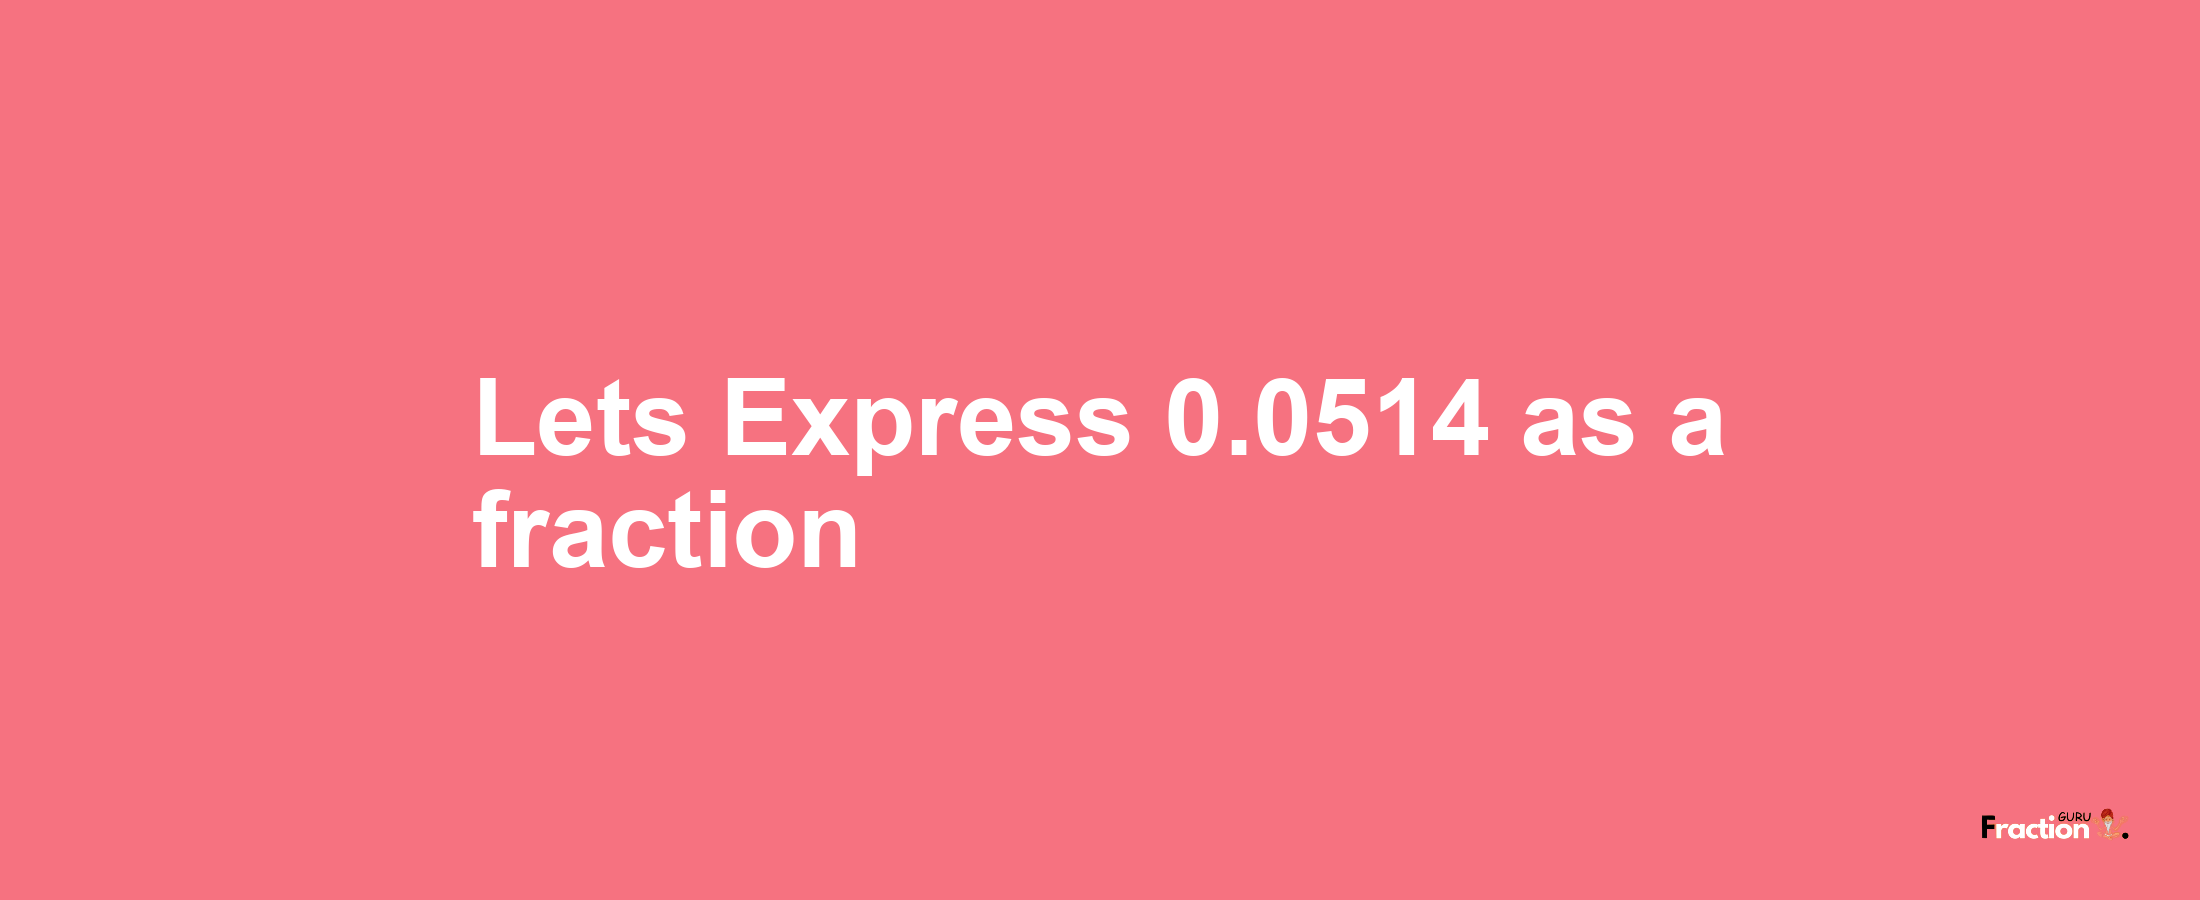 Lets Express 0.0514 as afraction